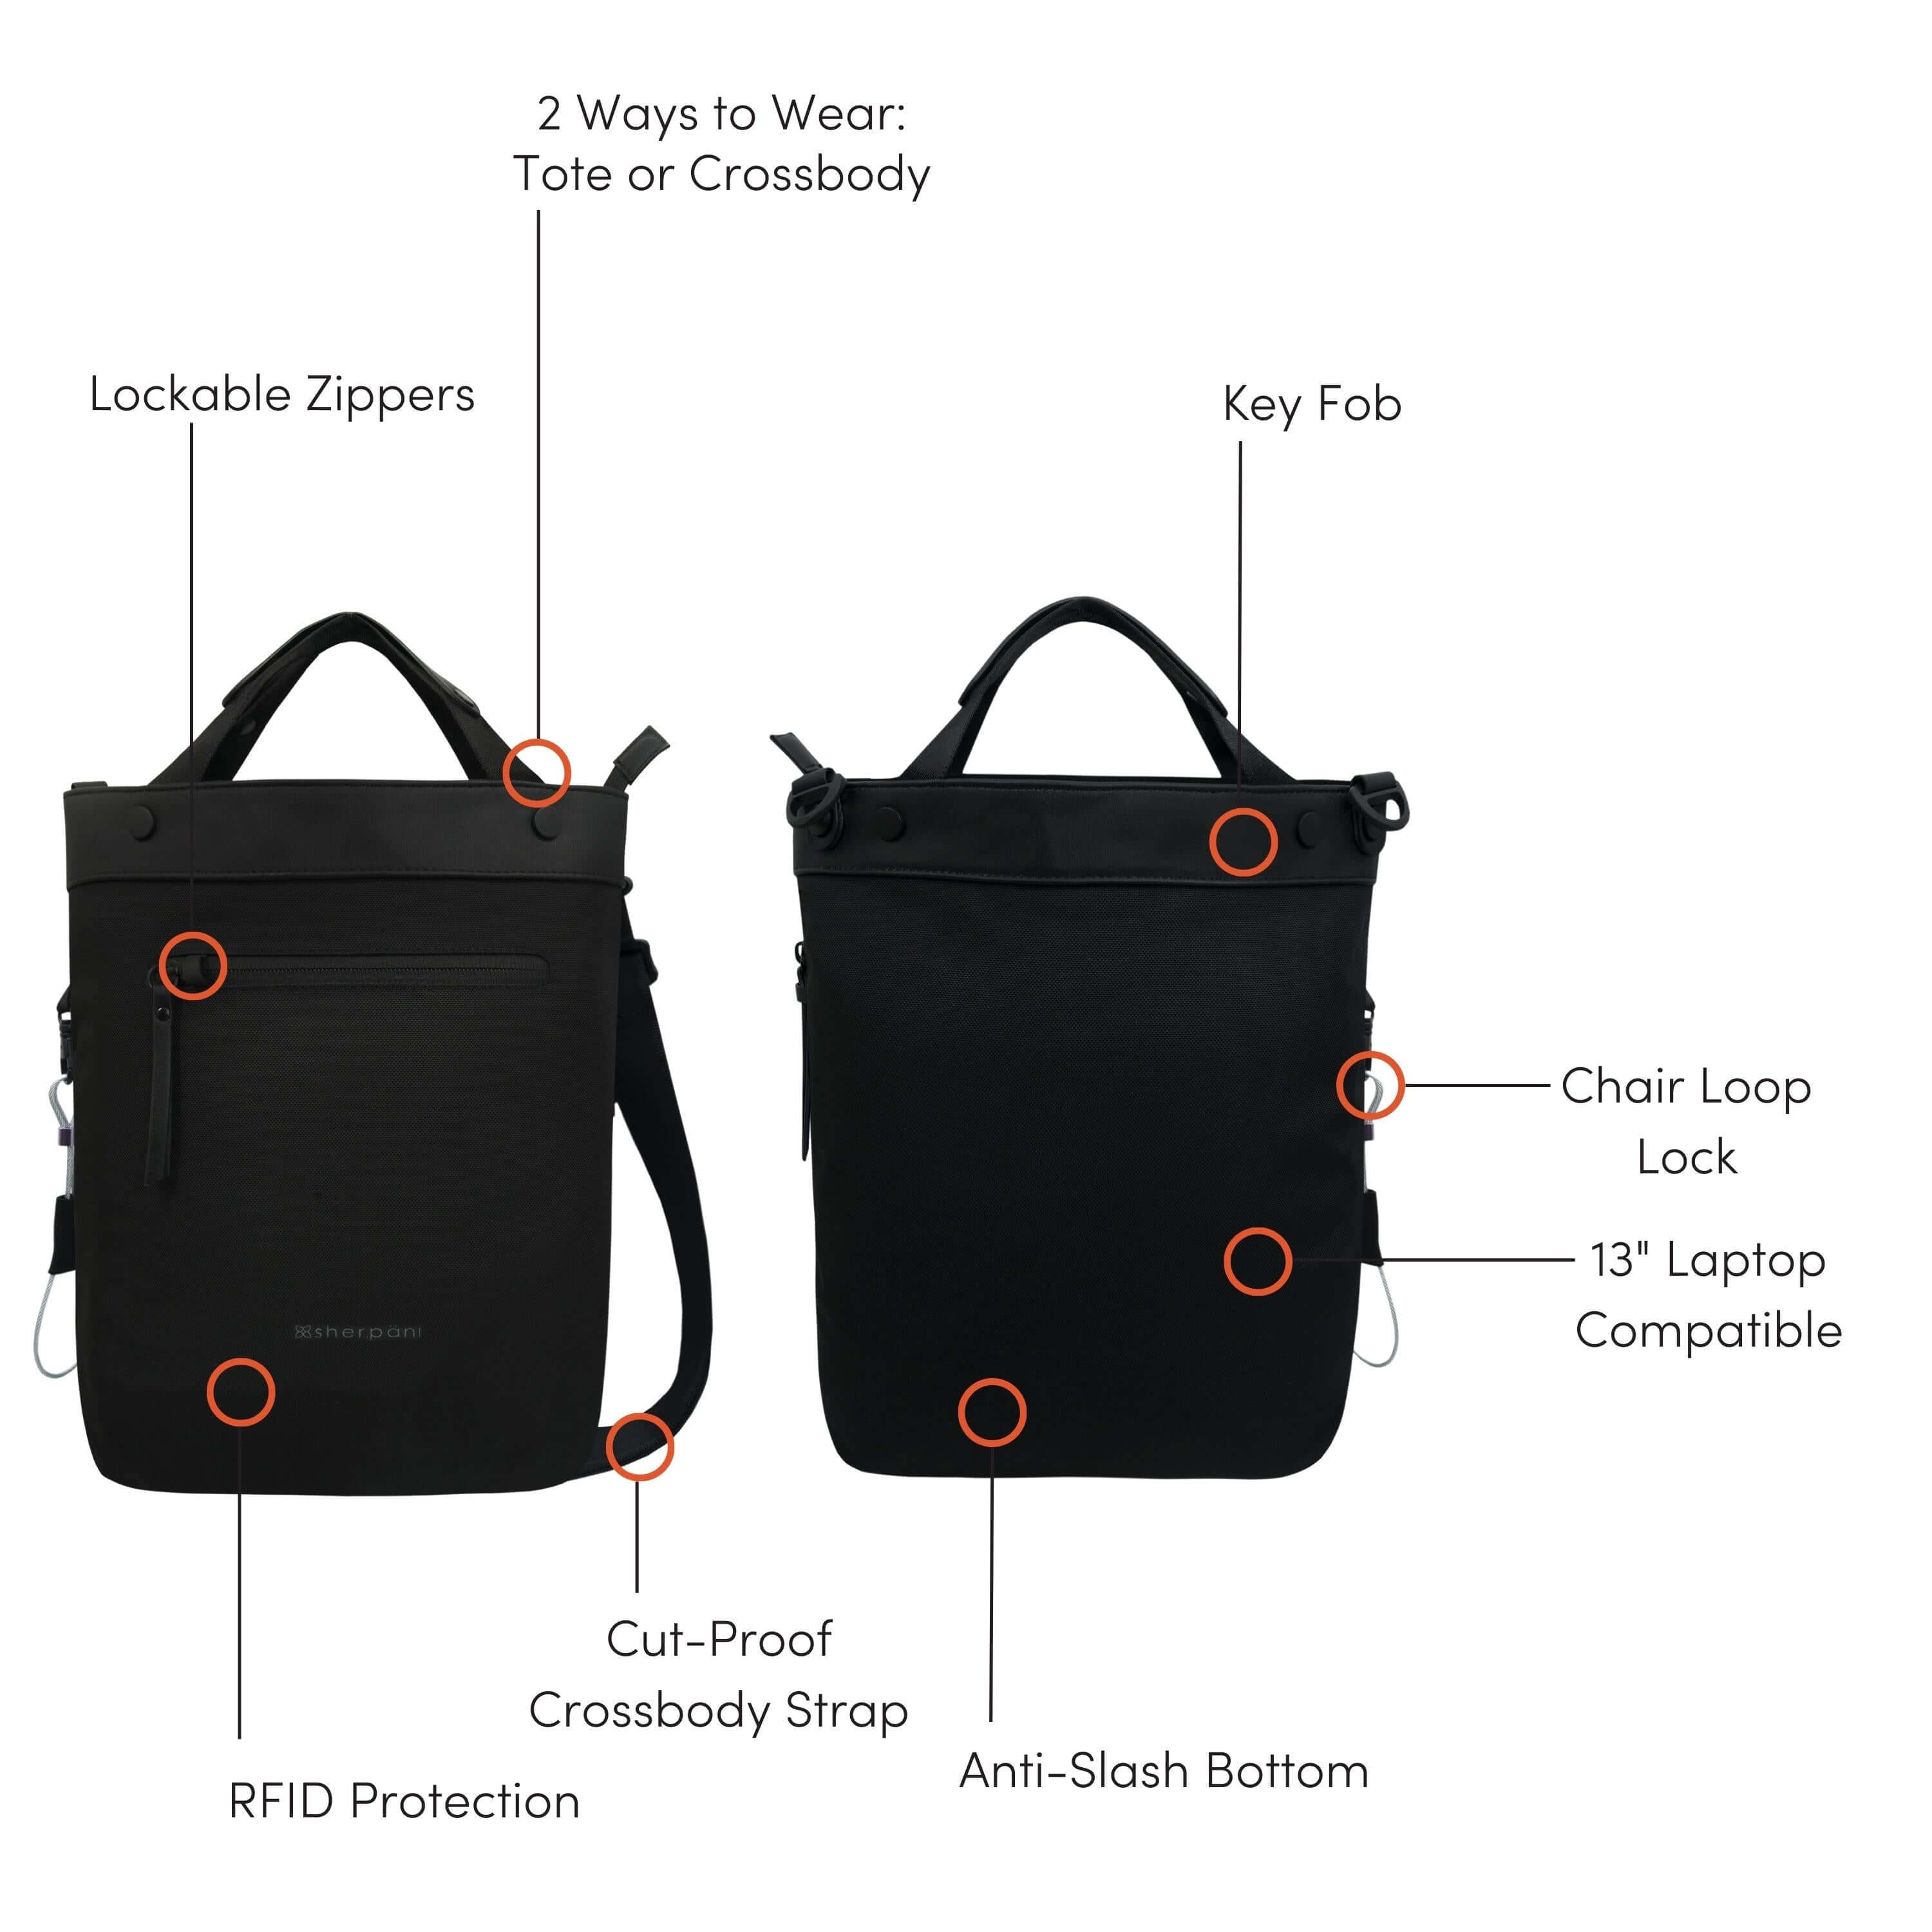 Graphic showcasing the features of Sherpani’s Anti Theft bag, the Soleil AT in Carbon. There is a front and a back view of the bag, red circles highlight the following features: Lockable Zippers, 2 Ways to Wear: Tote or Crossbody, Key Fob, Chair Loop Lock, 13” Laptop Compatible, Anti-Slash Bottom, Cut-Proof Crossbody Strap, RFID Protection. 